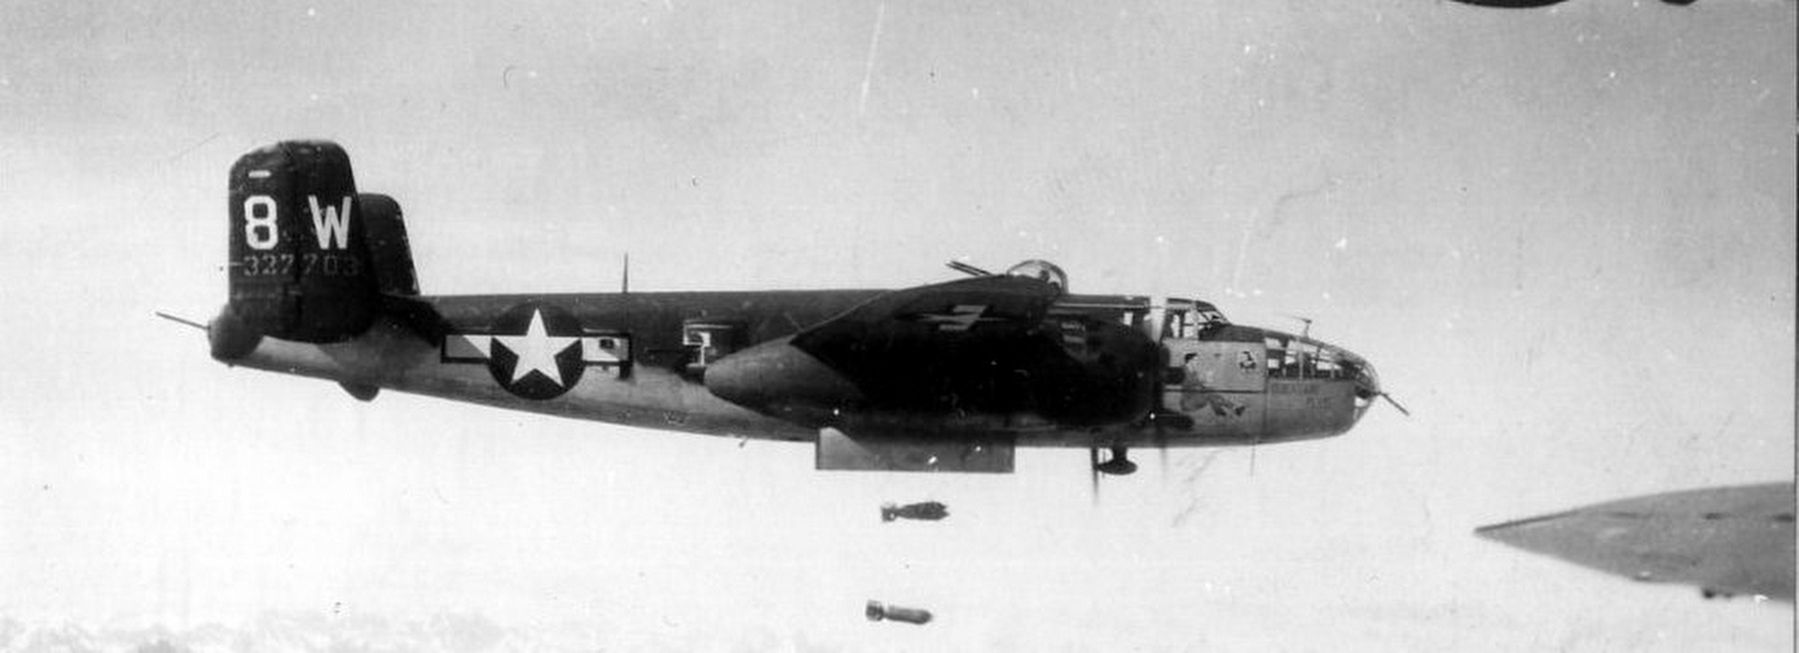 B-25J-1-NC #43-27703 "Duration Plus" Code: 8W 340th Bomb Group - 488th Bomb Squadron - 12th AF image. Click for full size.